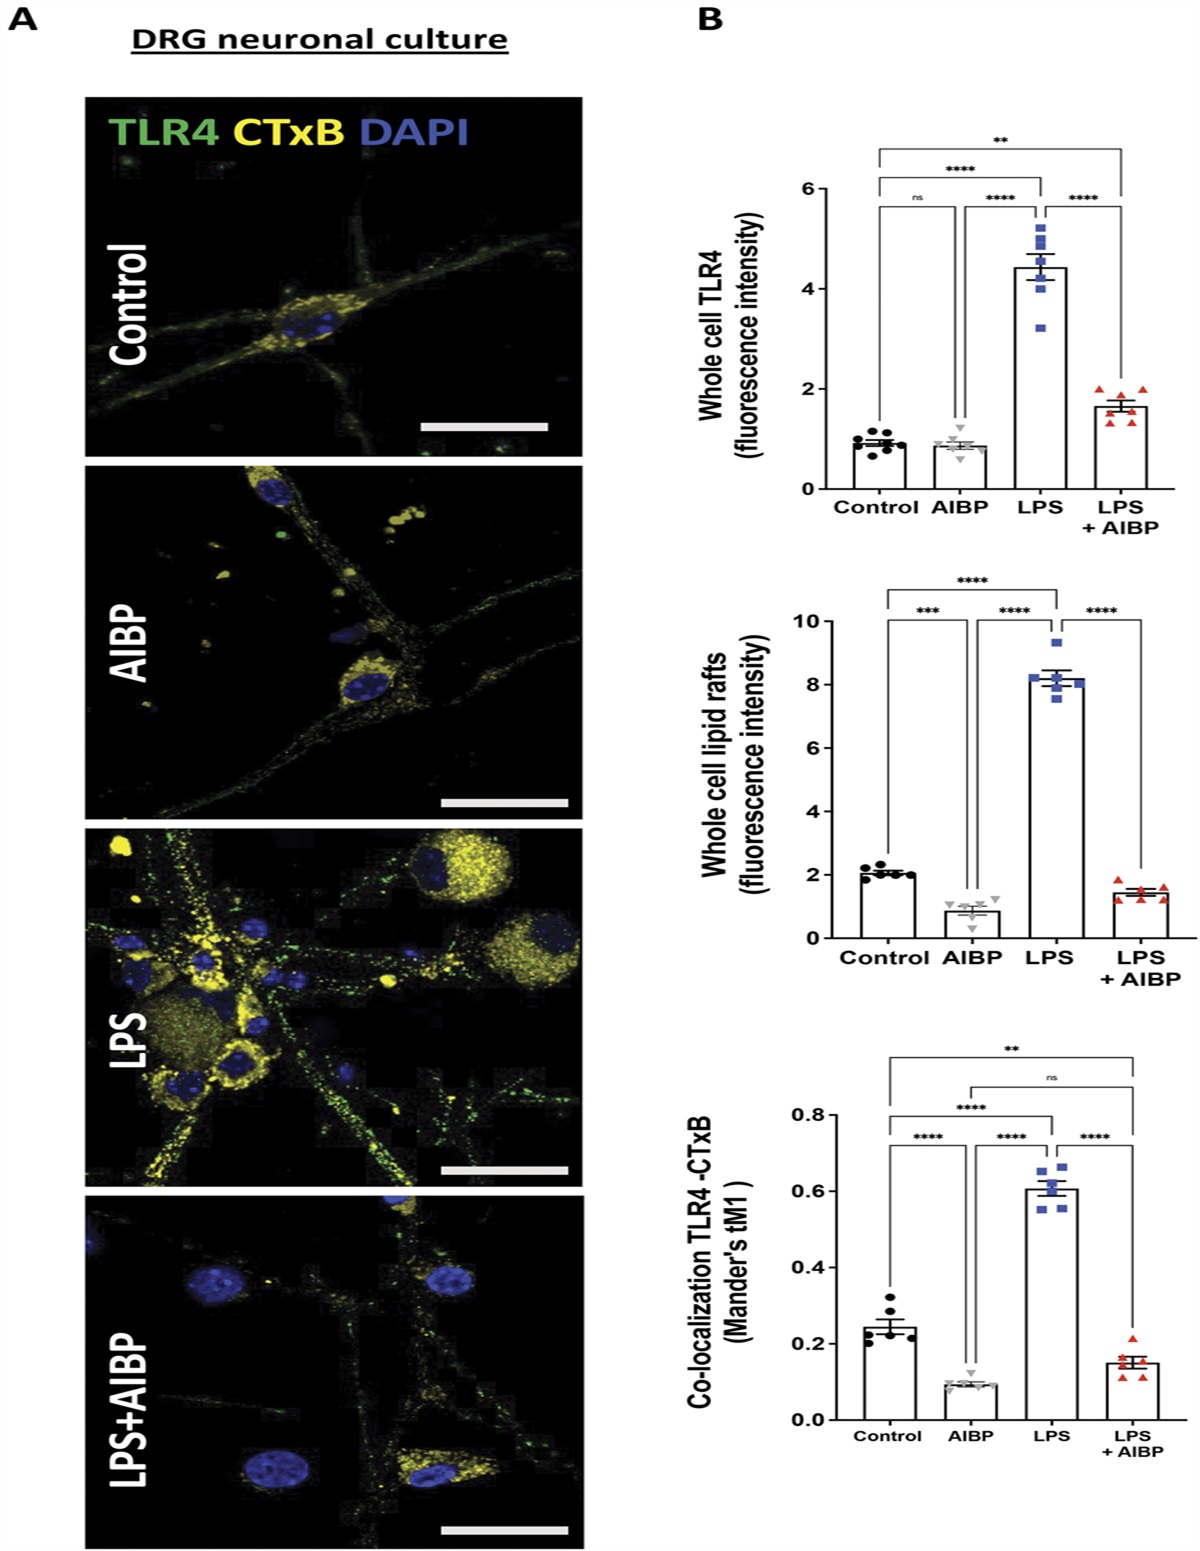 AIBP regulates TRPV1 activation in chemotherapy-induced peripheral neuropathy by controlling lipid raft dynamics and proximity to TLR4 in dorsal root ganglion neurons